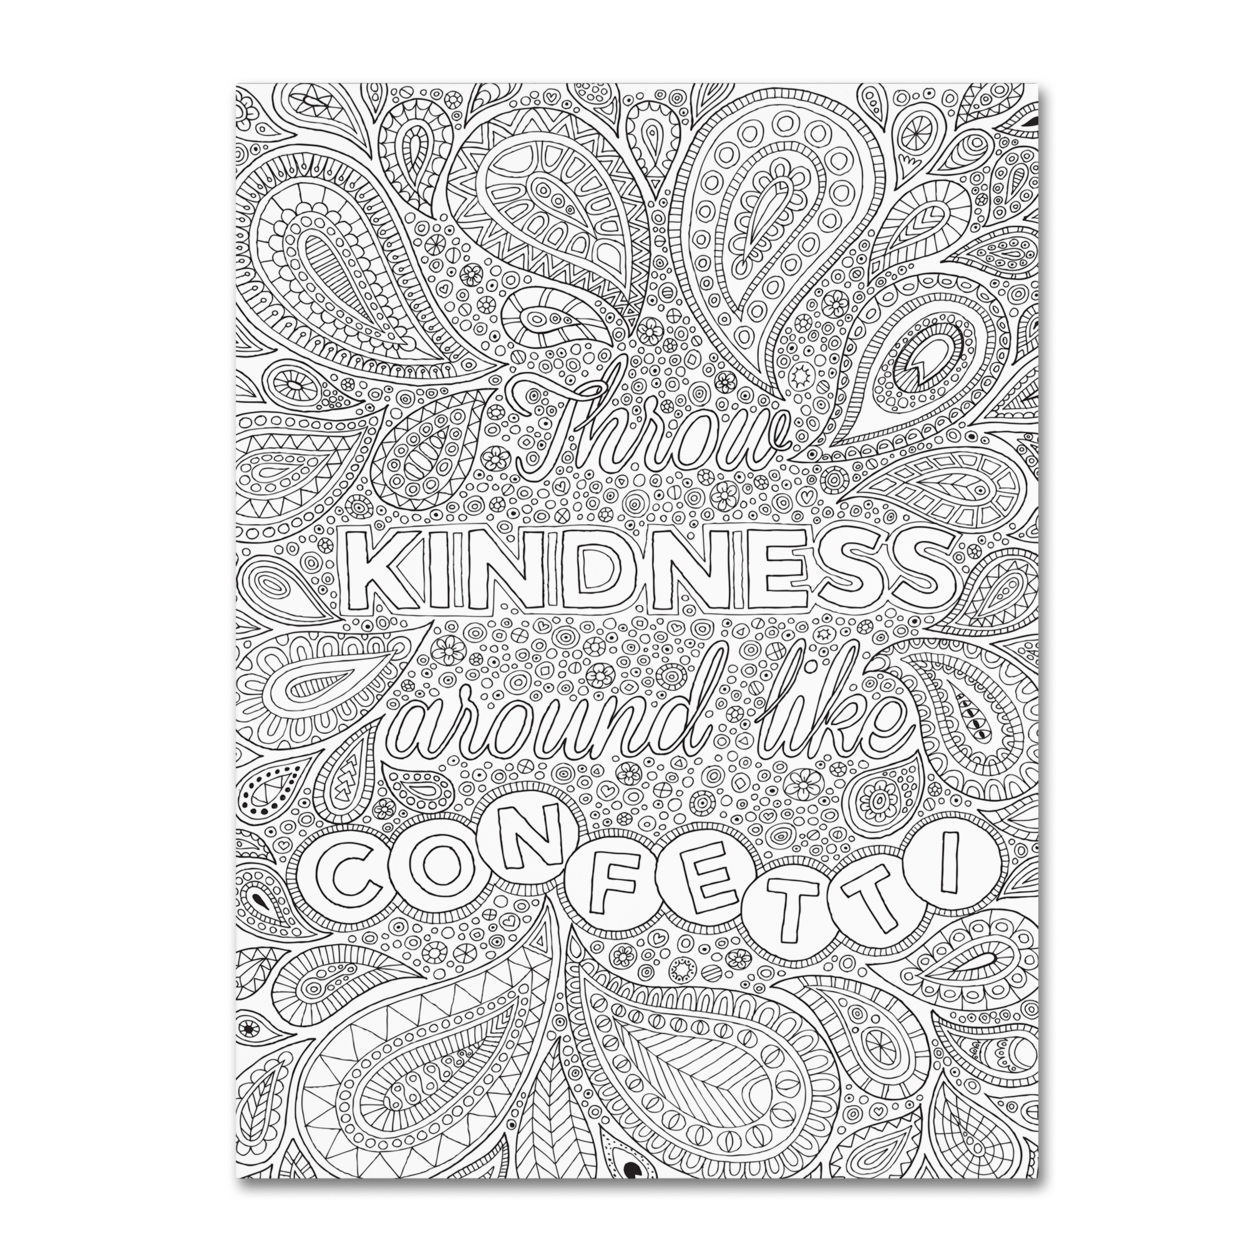 Hello Angel 'Throw Kindness Around Like Confetti' Canvas Wall Art 35 X 47 Inches